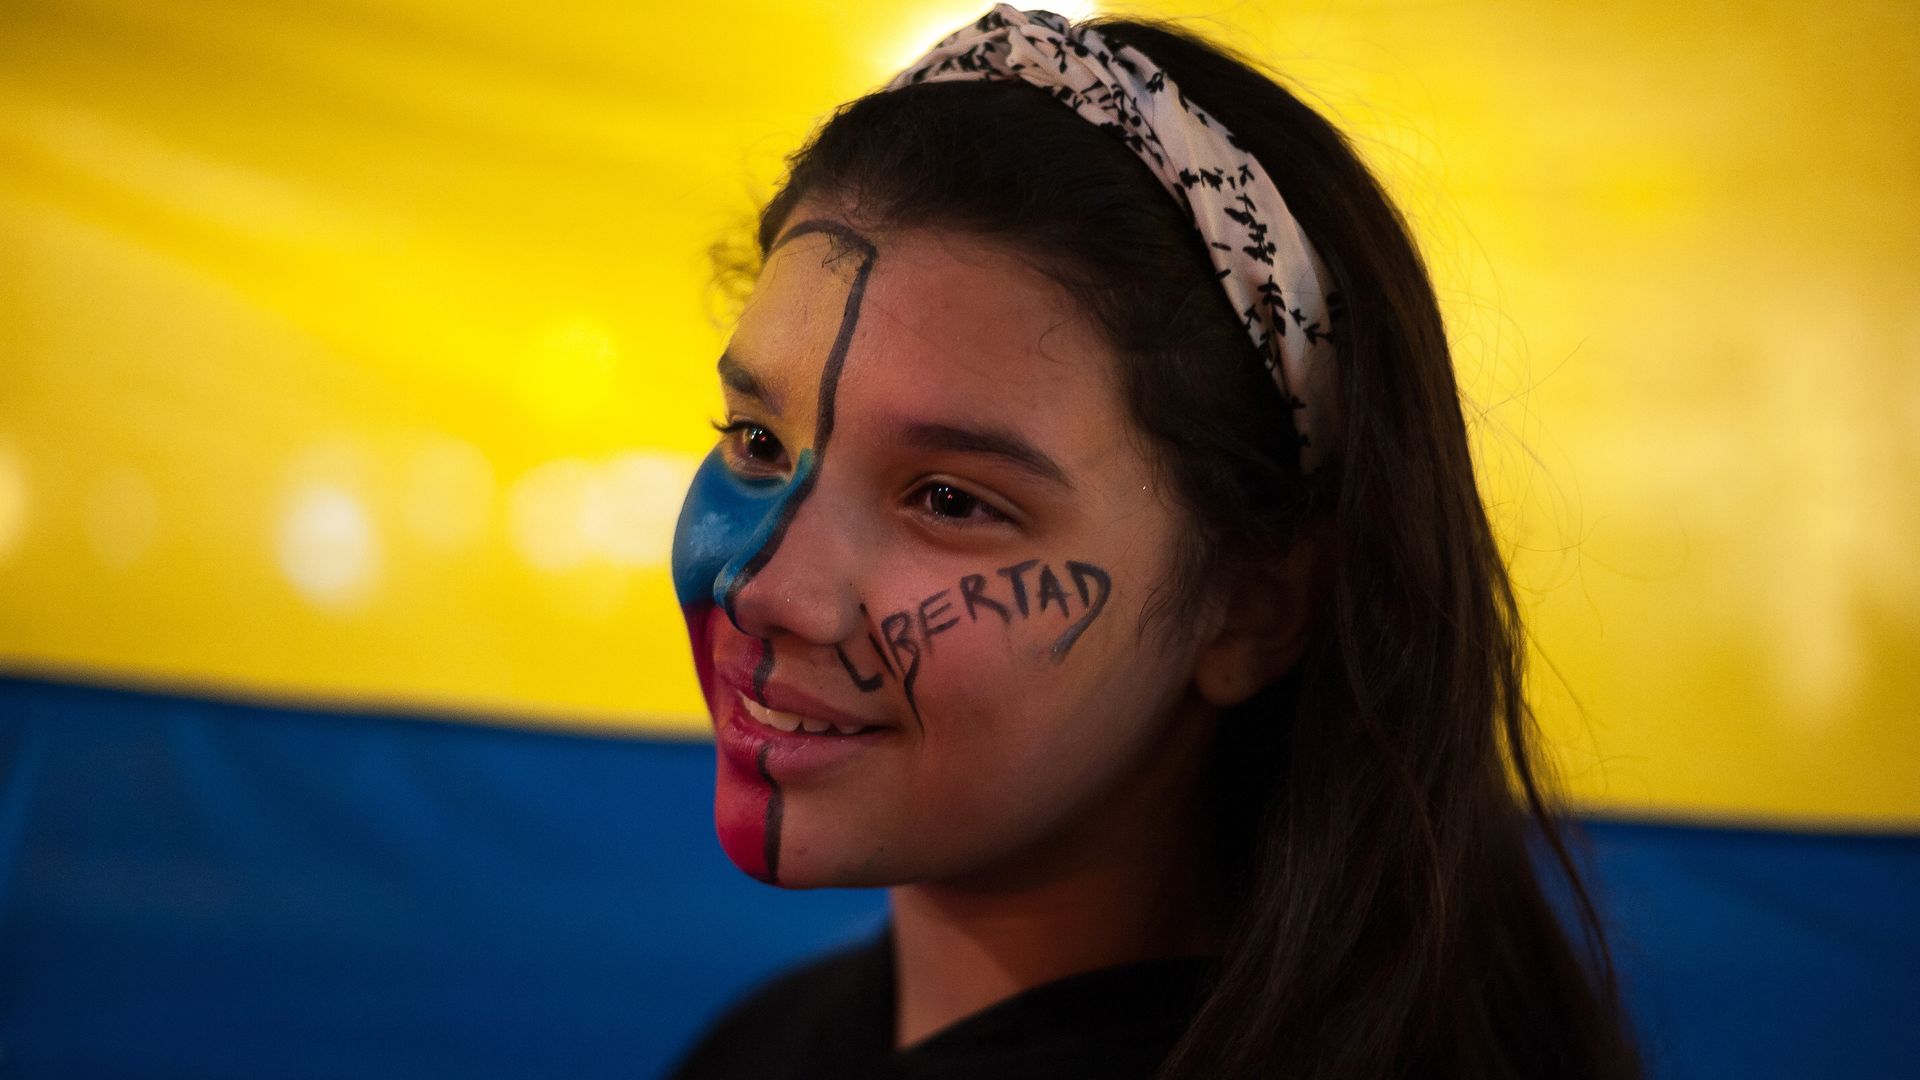 MALAGA, SPAIN - 2019/01/23: A venezuelan protester with words written on her face seen during the demonstration in support of politician Juan Guaidó.